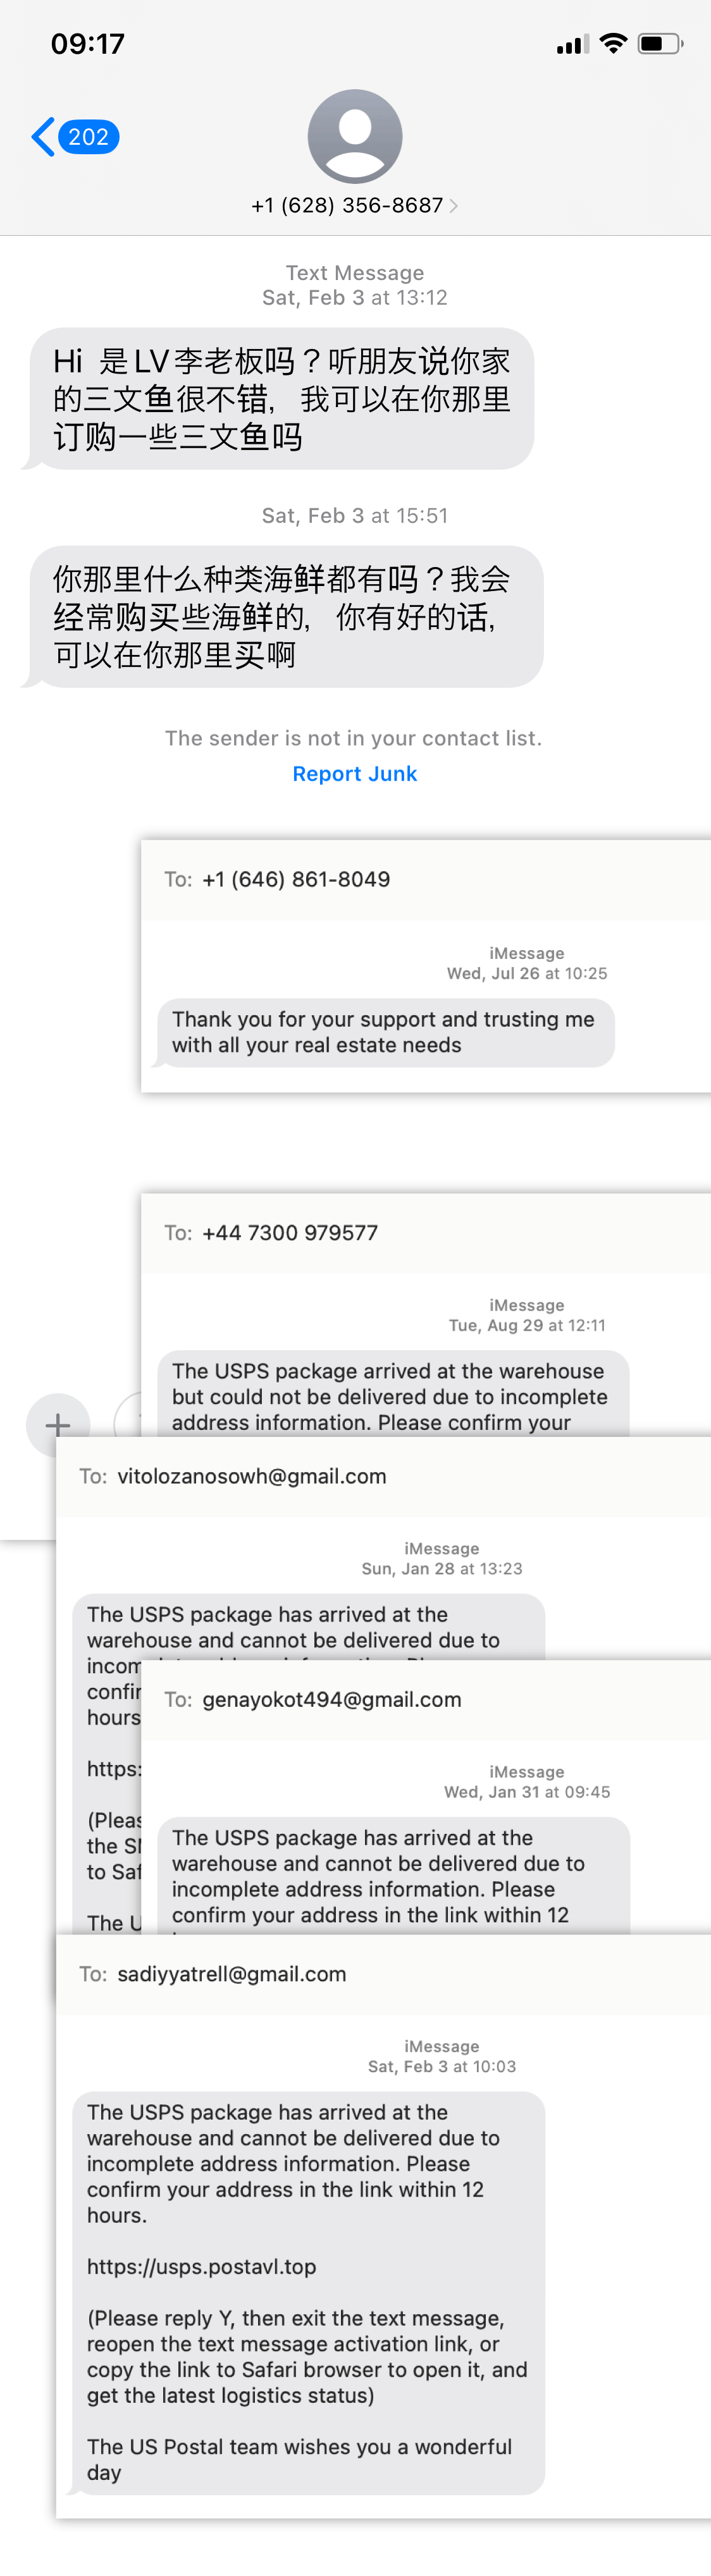 text msg scam